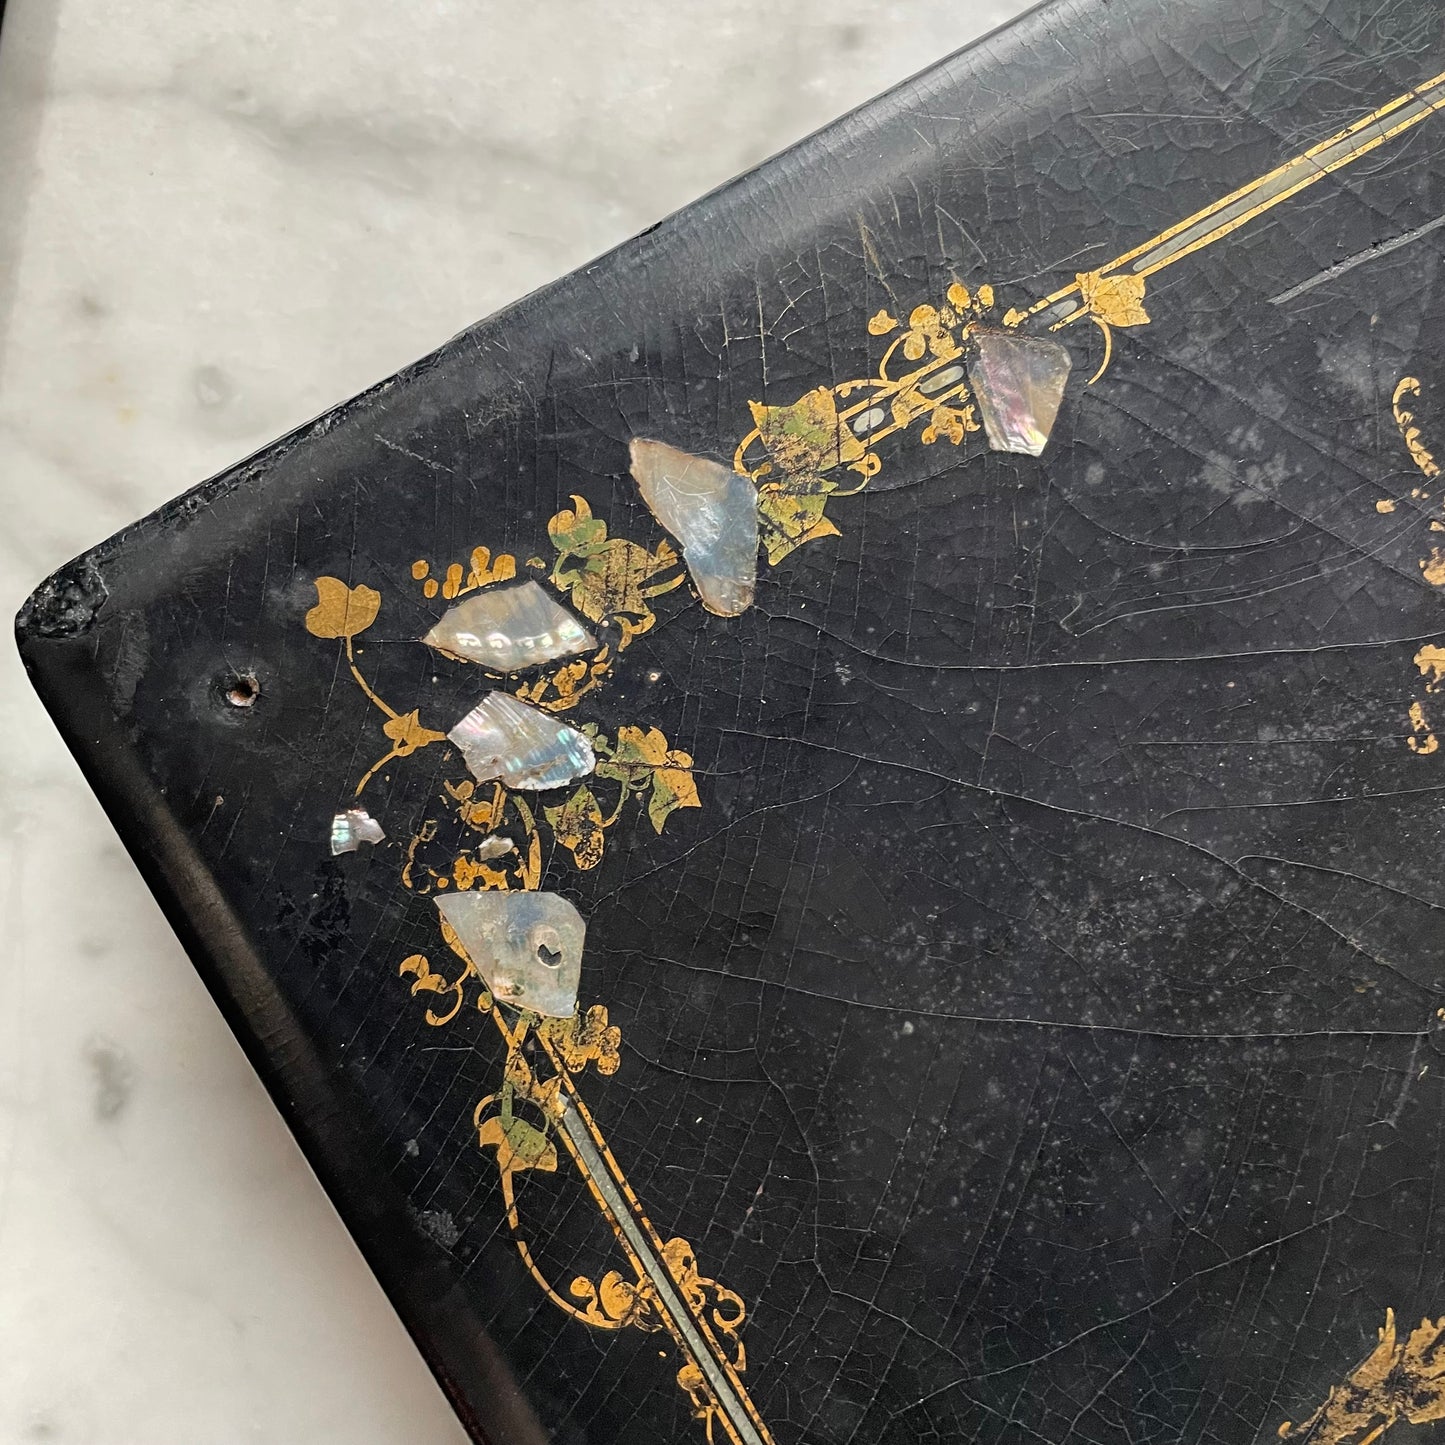 Victorian Mother of Pearl Inlaid Photo Album